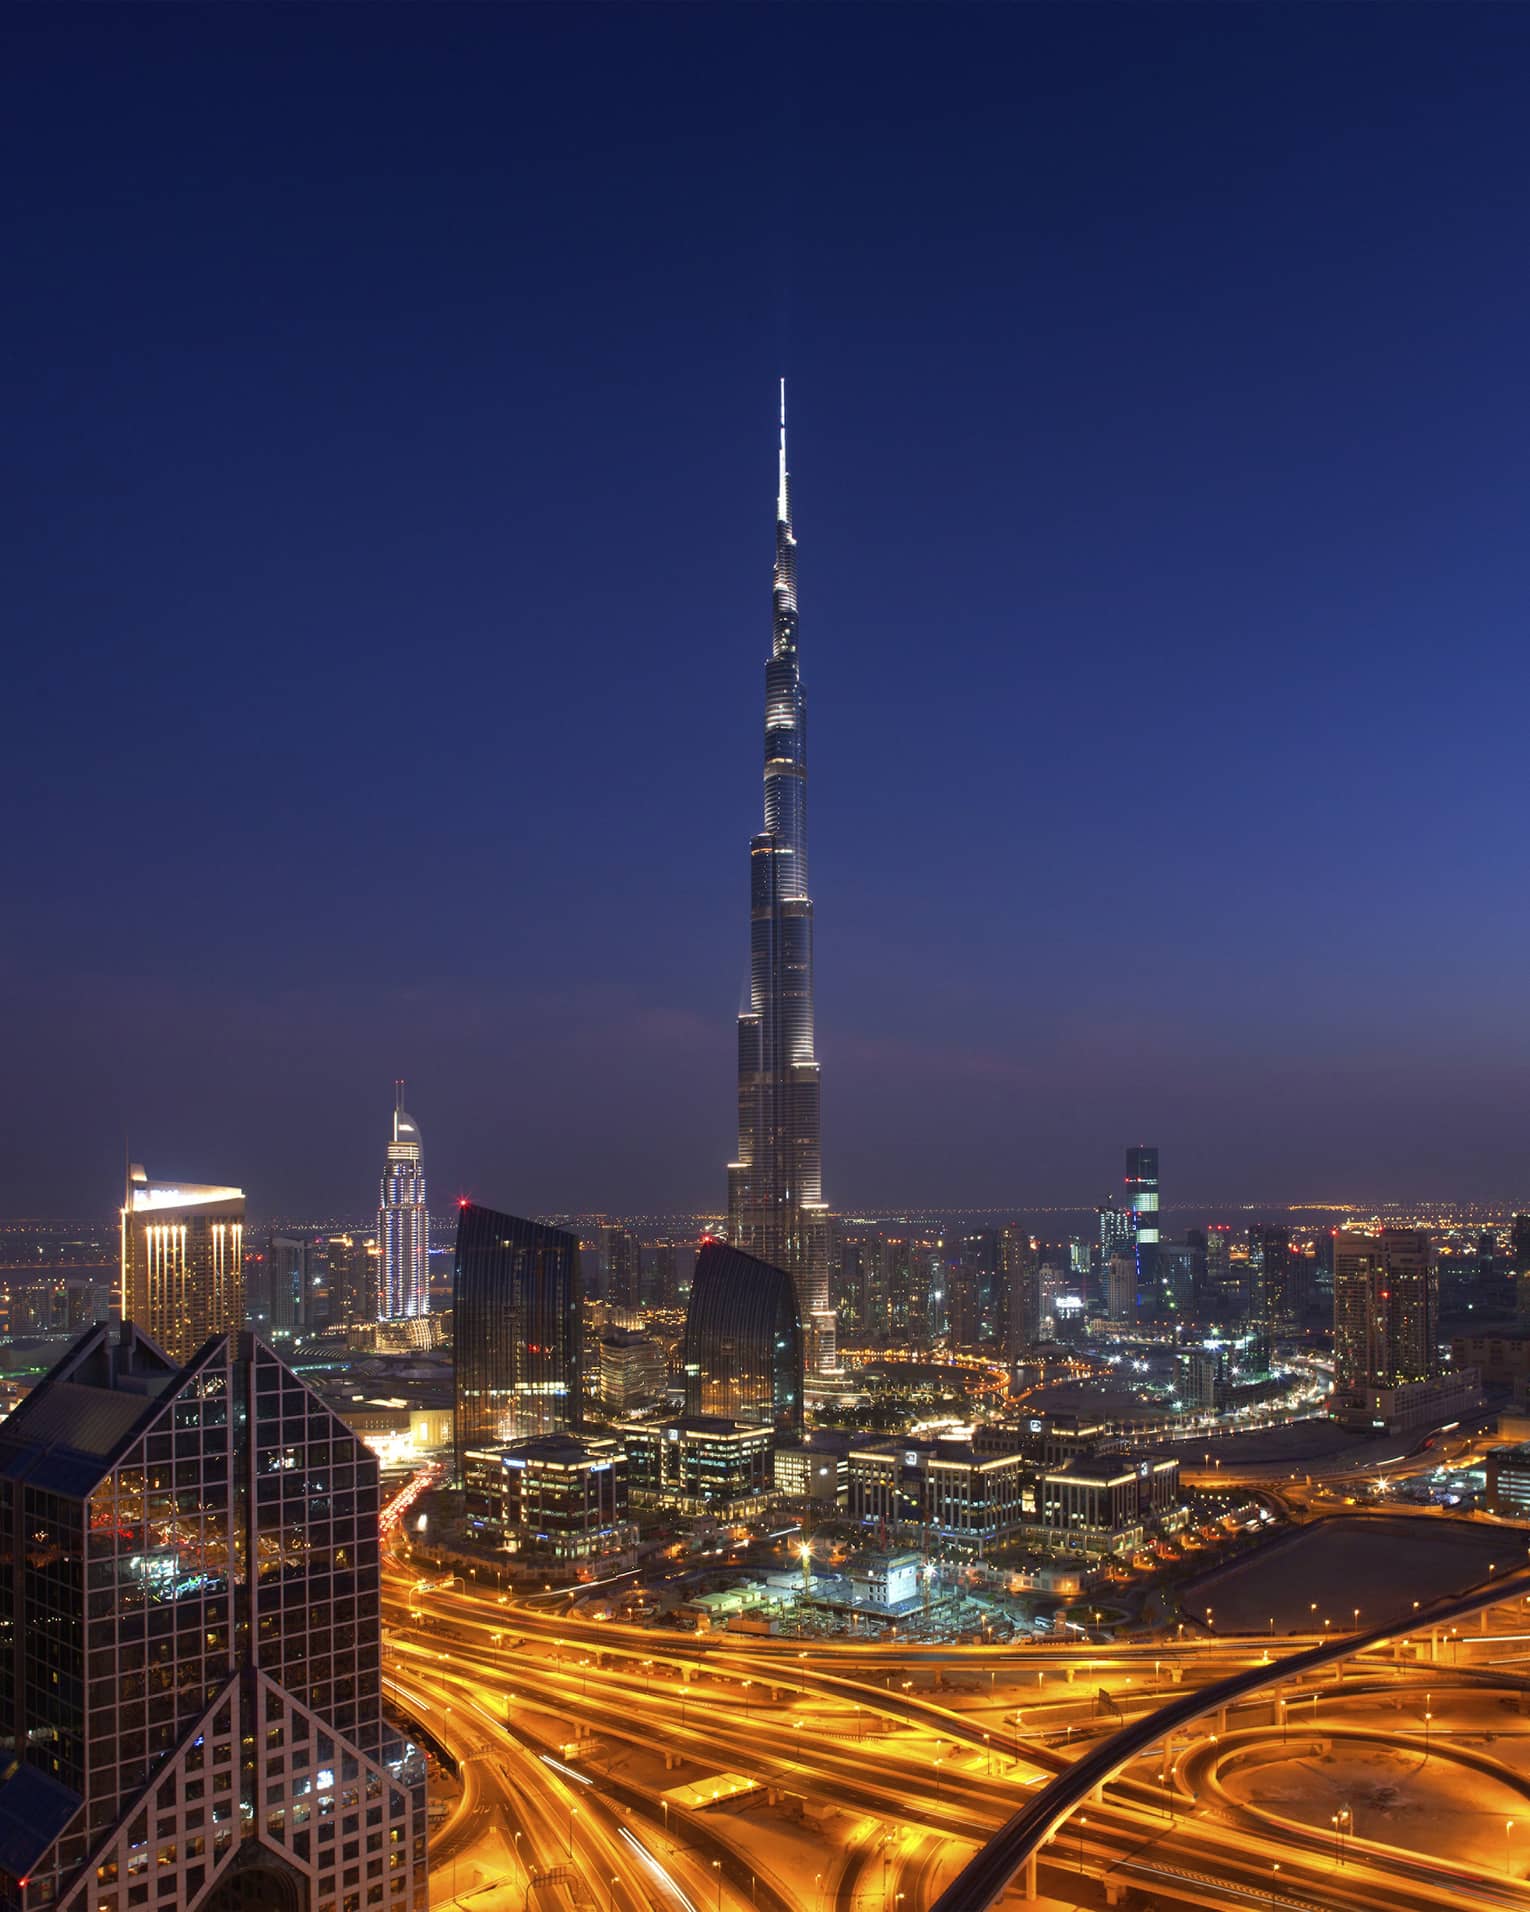 The Burj Khalifa towering over downtown Dubai under a dark starless sky, the city lit by the glow of cars and buildings.